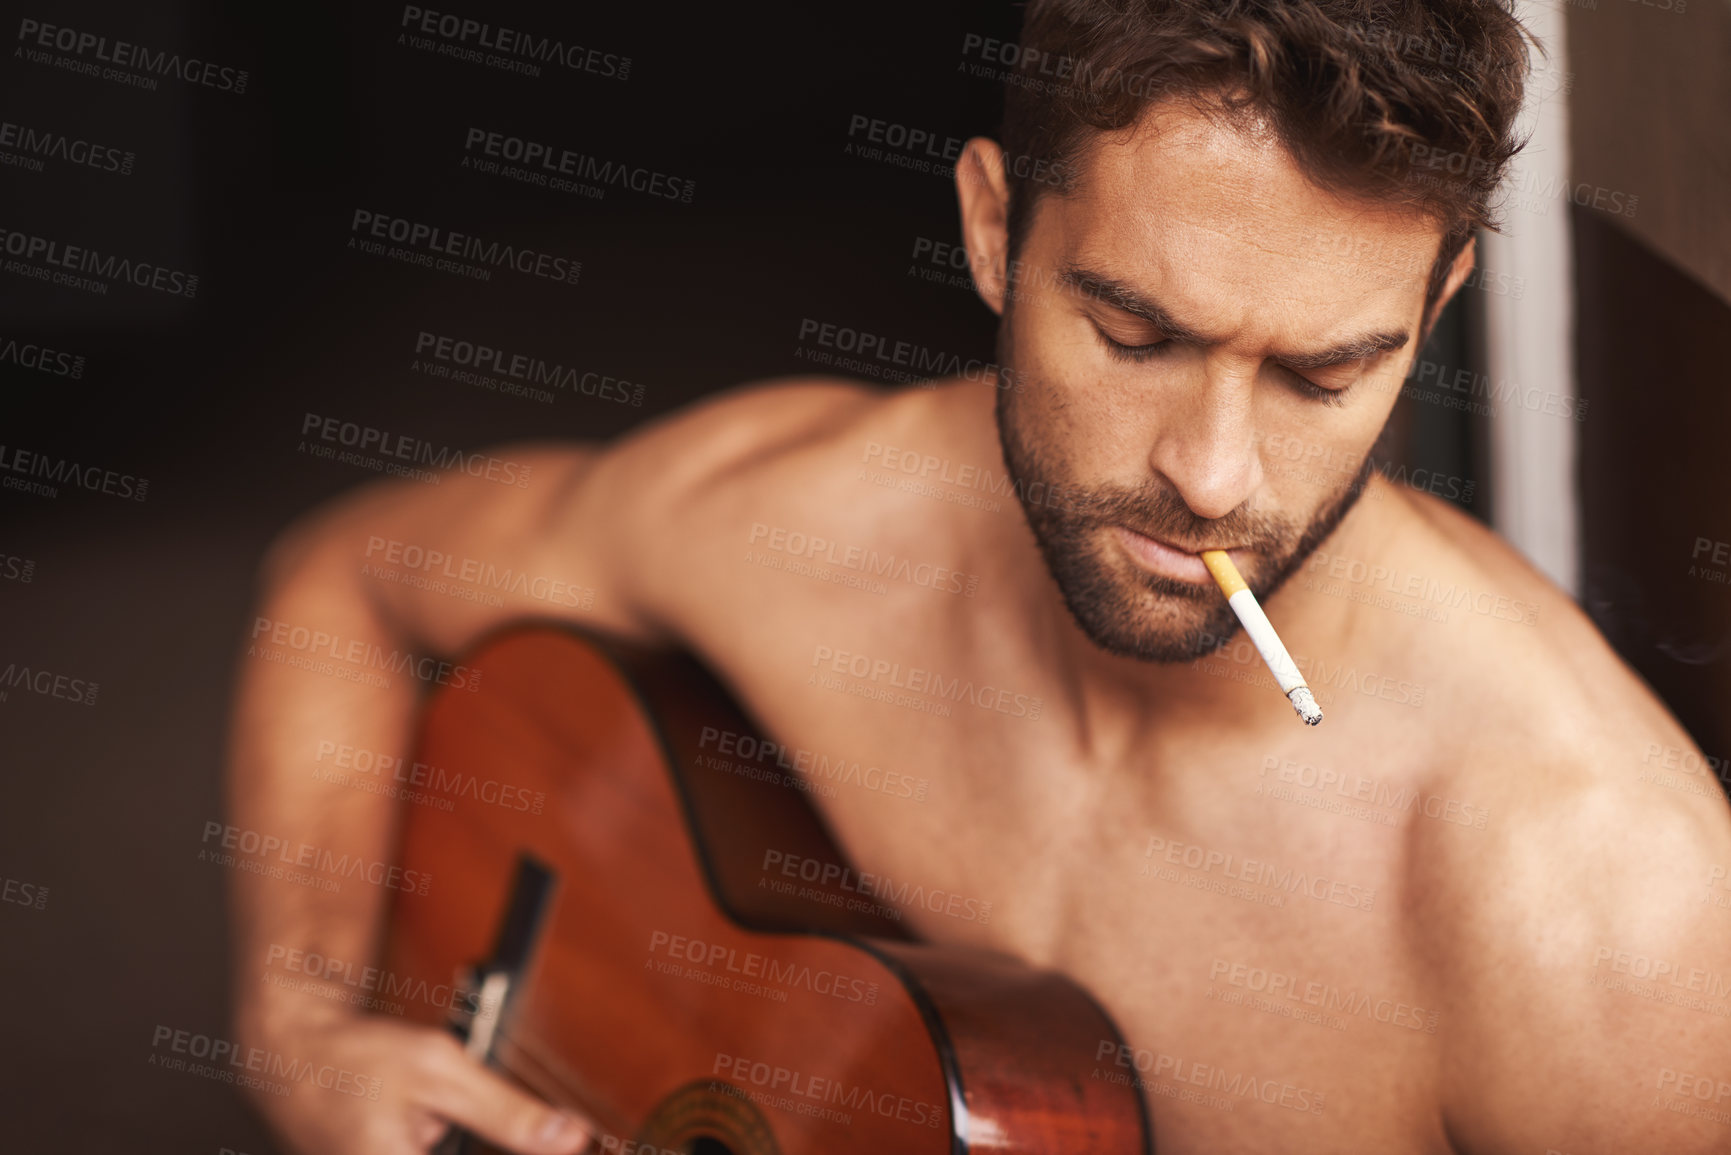 Buy stock photo Cropped shot of a shirtless young man playing guitar at home